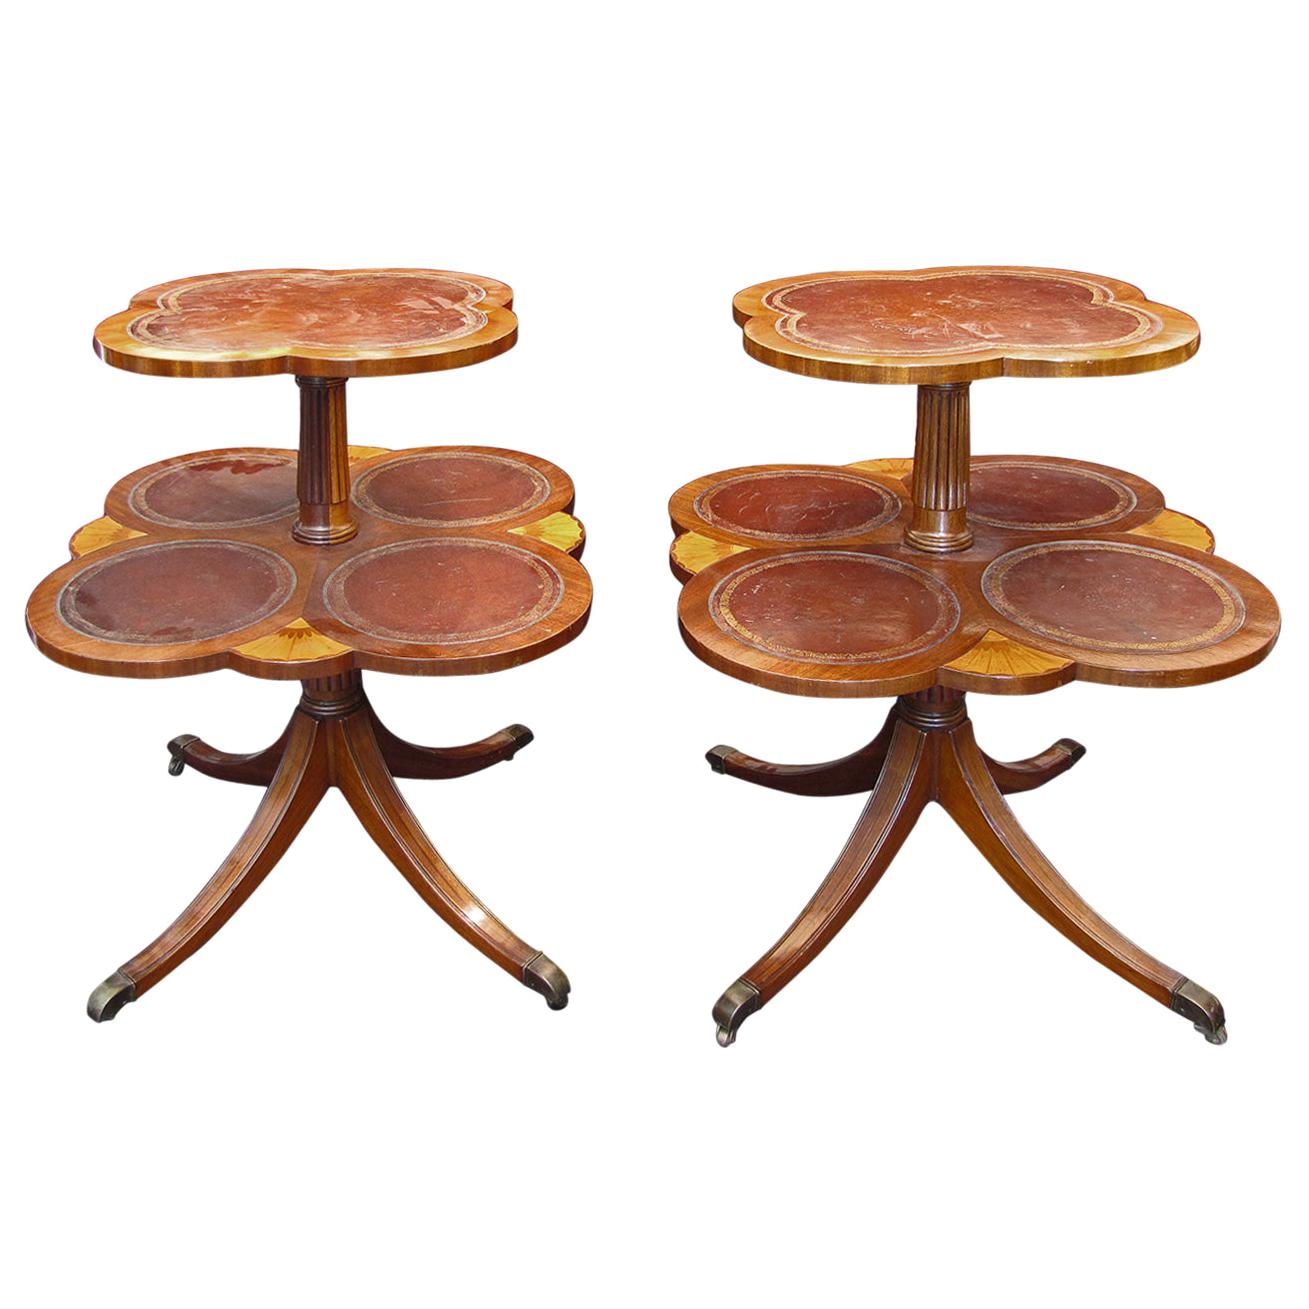 19th Century Two-Tier Side Tables with Saber Legs by J.B. Van Sciver Co. For Sale